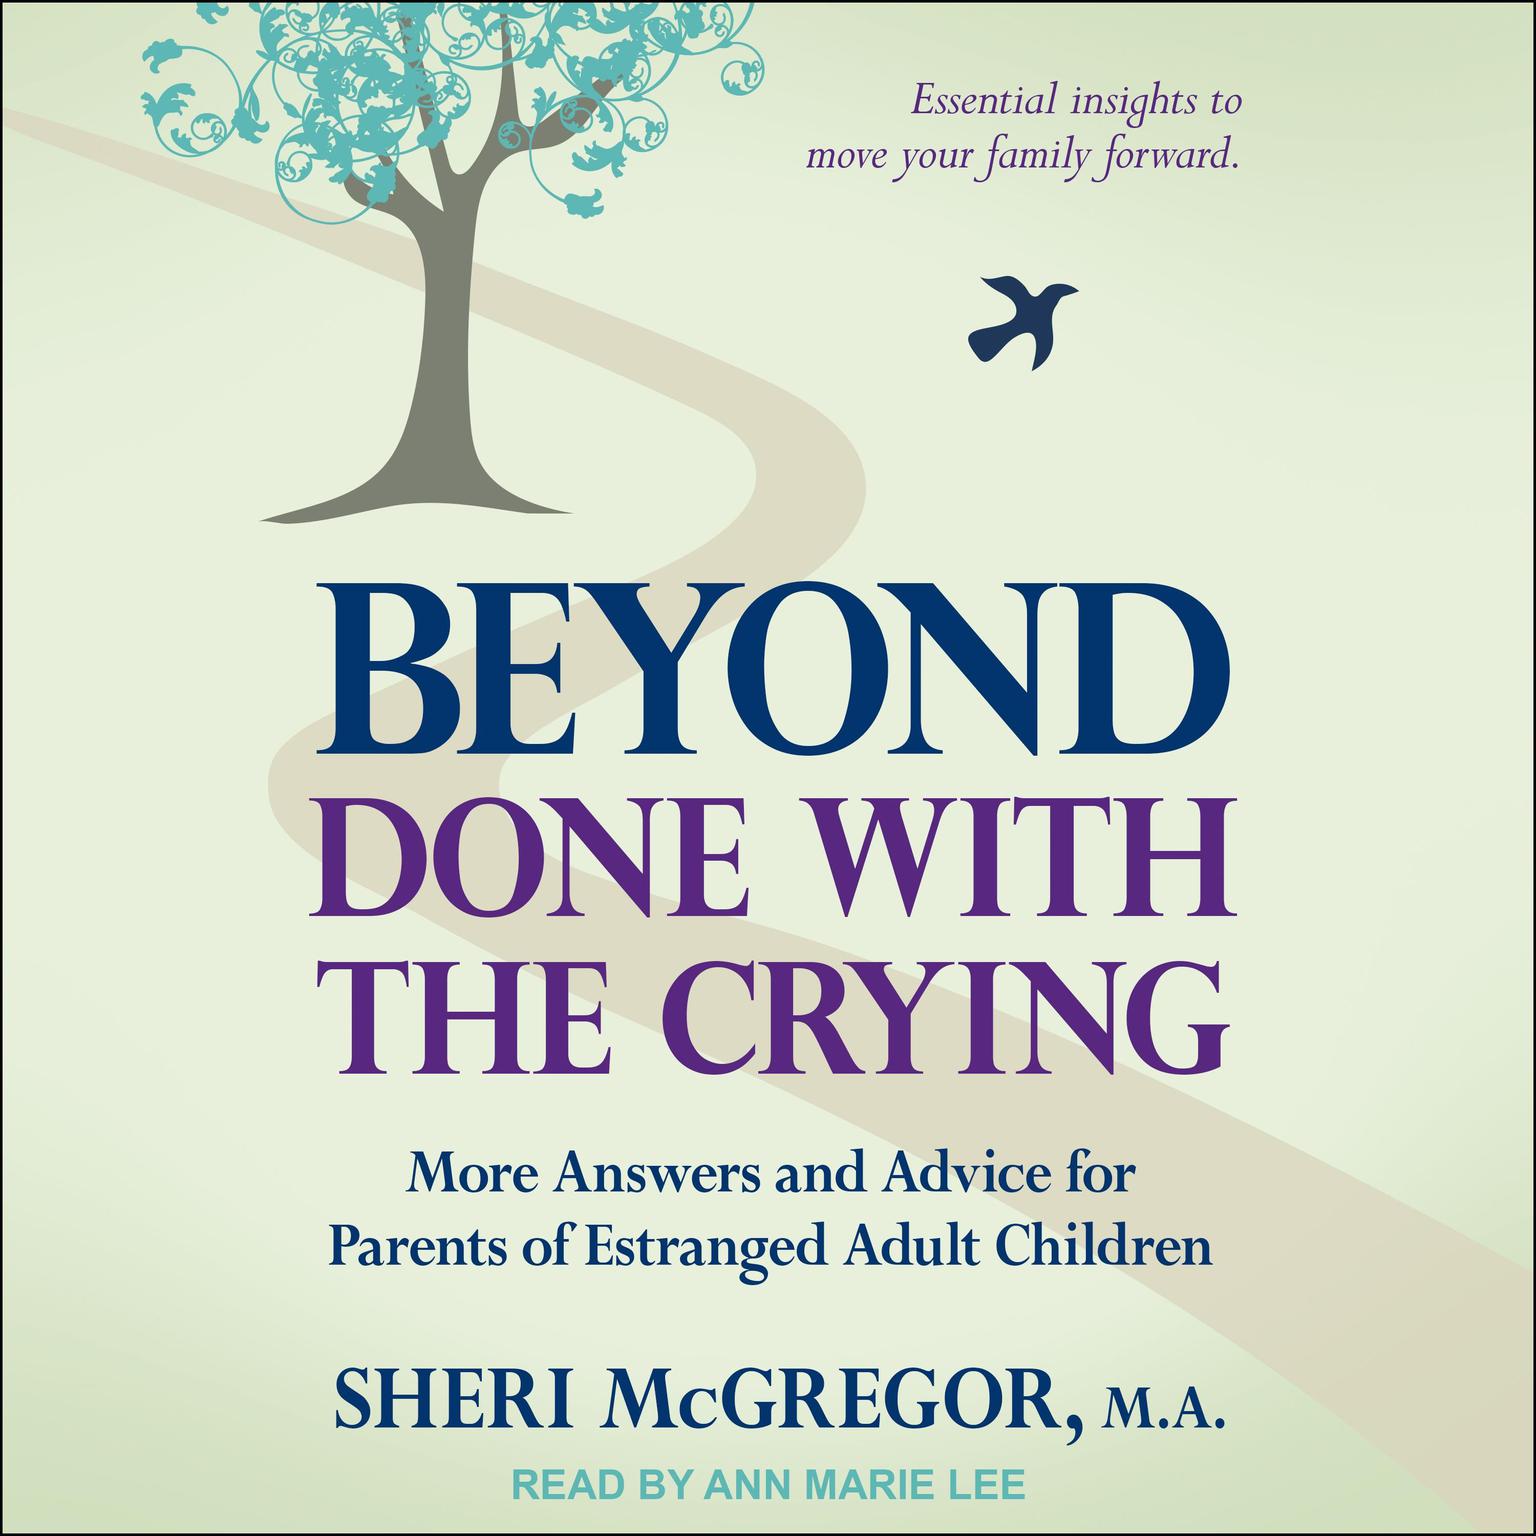 Beyond Done With The Crying: More Answers and Advice for Parents of Estranged Adult Children Audiobook, by Sheri McGregor